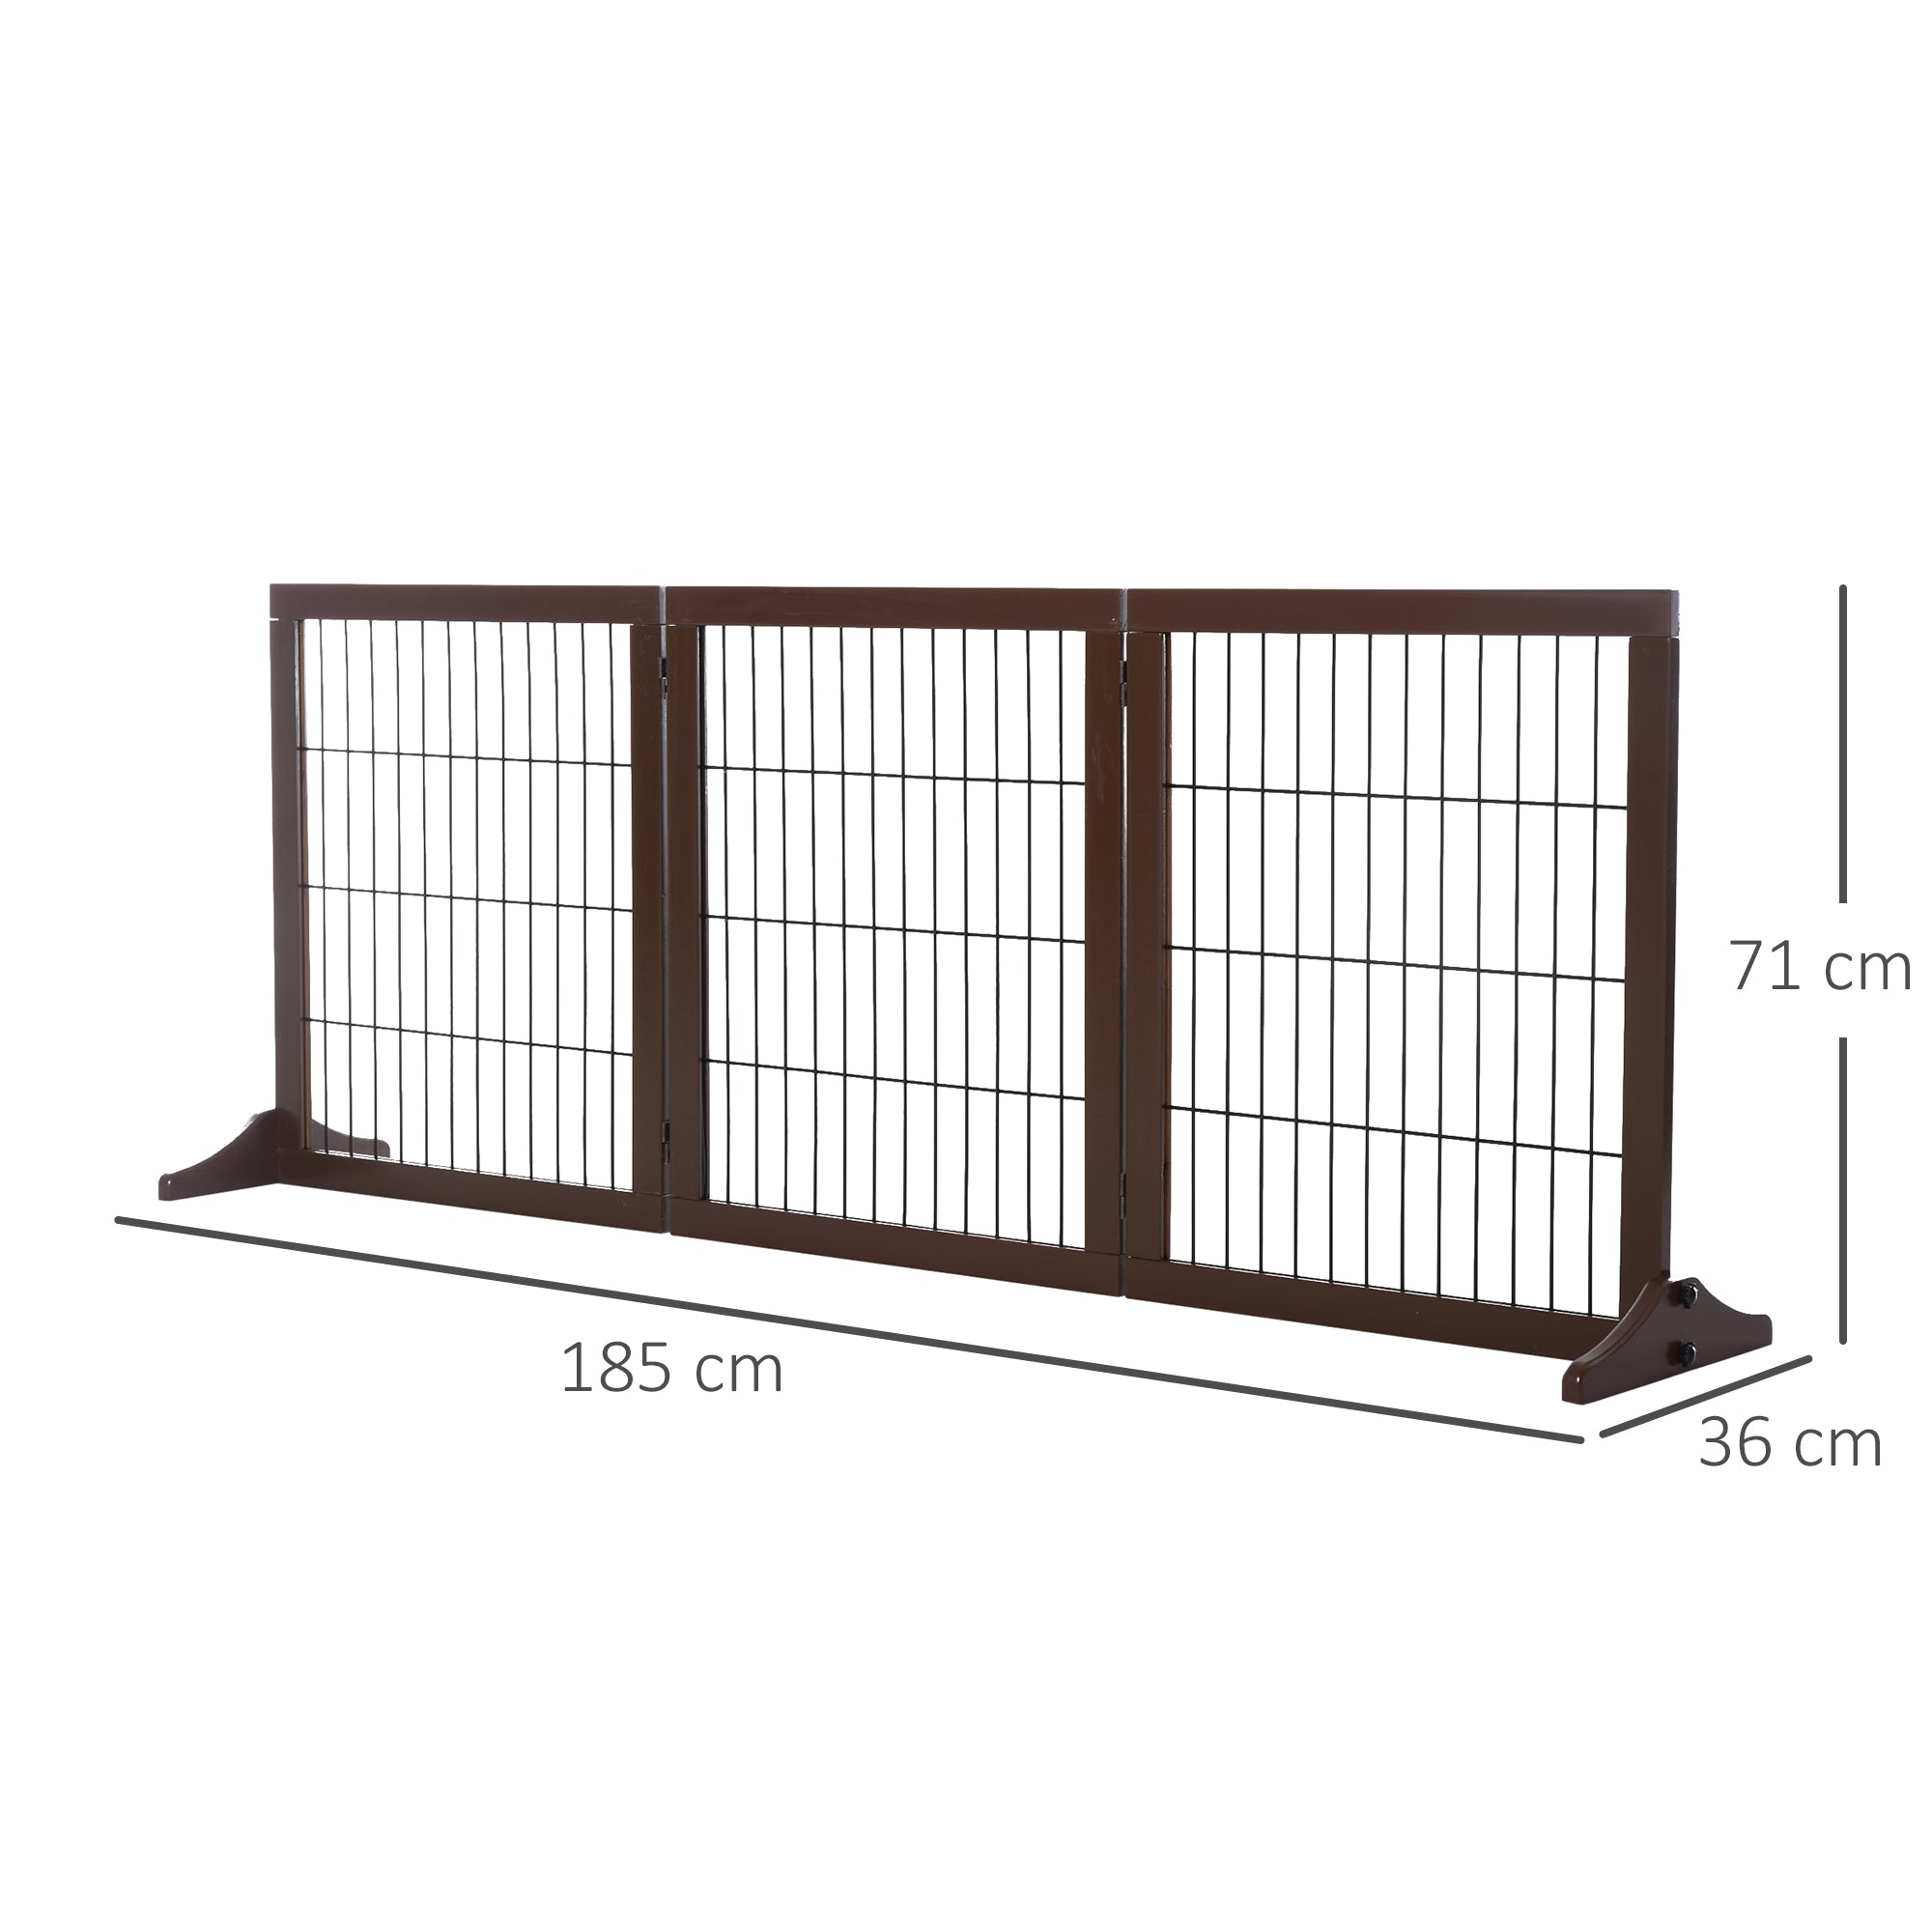 PawHut 3 Panel Pet Gate Pine Frame Indoor Foldable Dog Barrier w/Supporting Foot Dividing Line Aisles Stairs - Inspirely